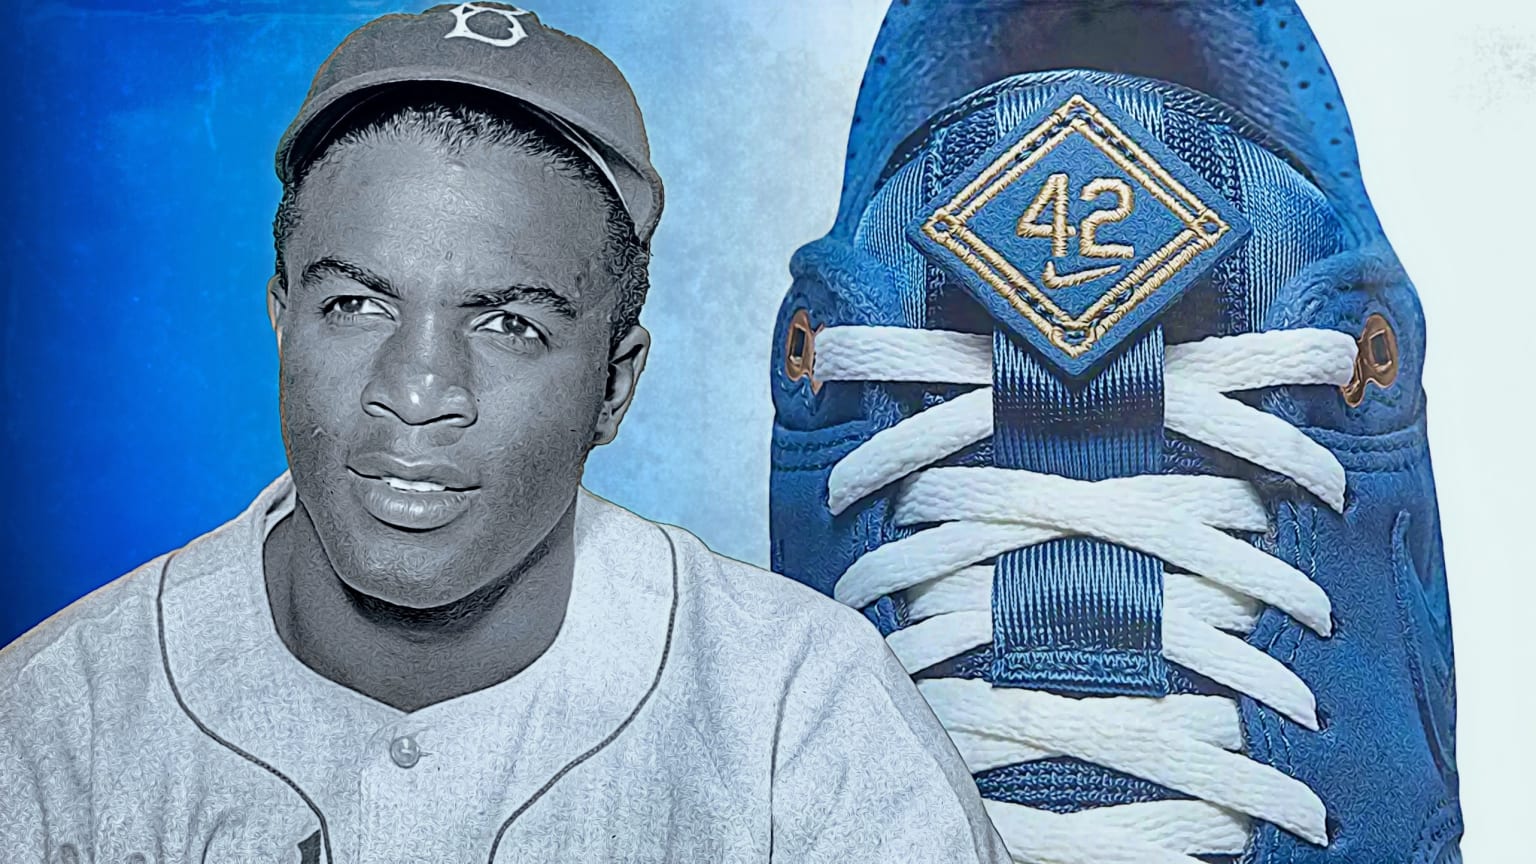 A photo of Jackie Robinson next to a shot of a new Nike shoe sporting No. 42